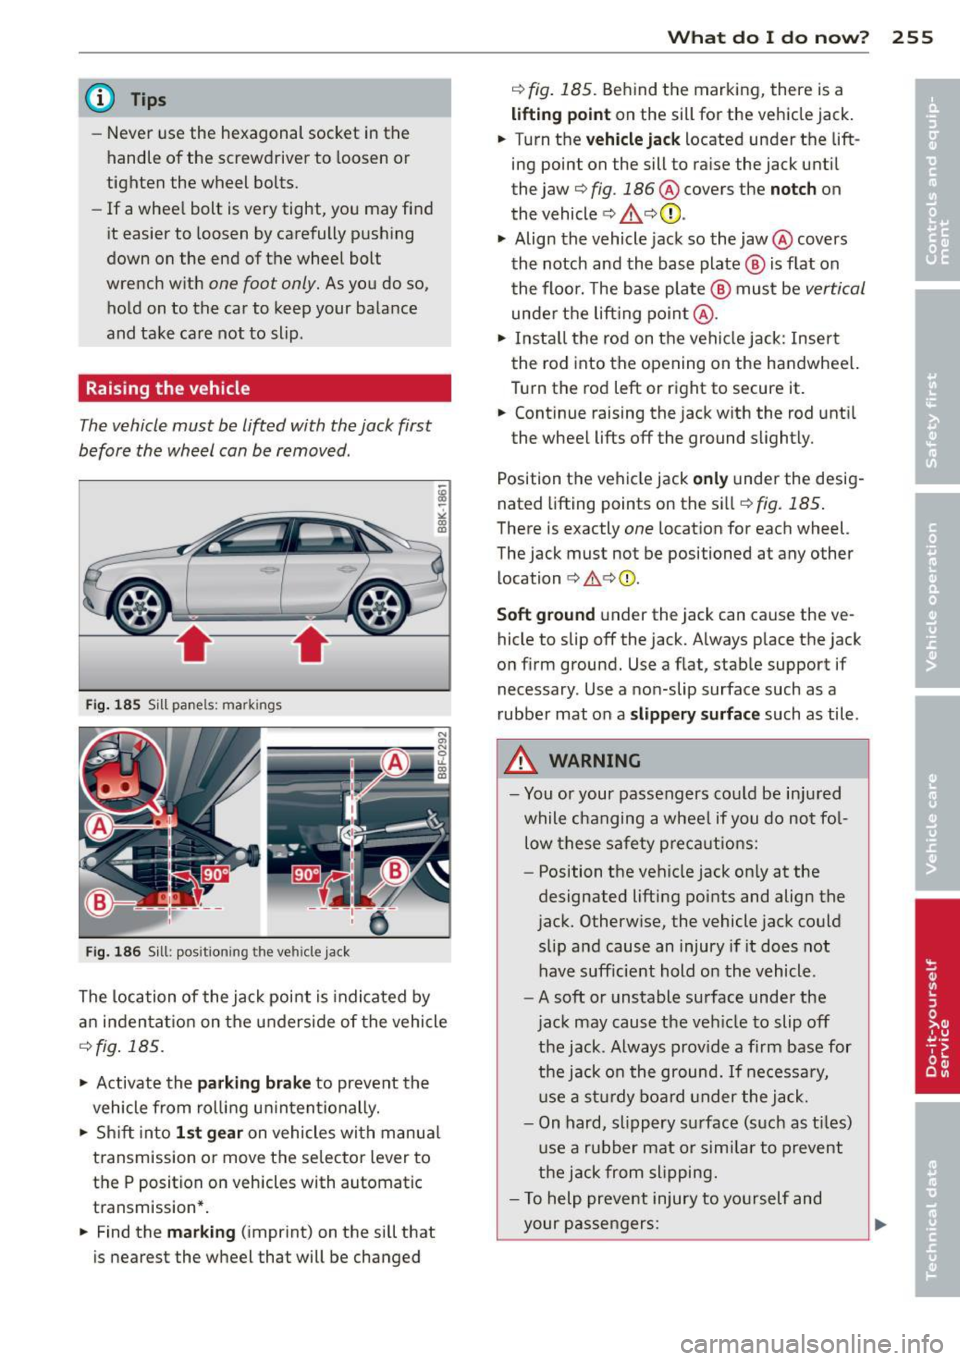 AUDI A4 SEDAN 2013  Owners Manual @ Tips 
-Never  use  the  hexagonal  socket  in the 
handle  of the  screwdriver  to  loosen  or 
tighten  the  wheel  bolts. 
- If  a whee l bolt  is very tight,  you  may  find 
it  easier  to  loos